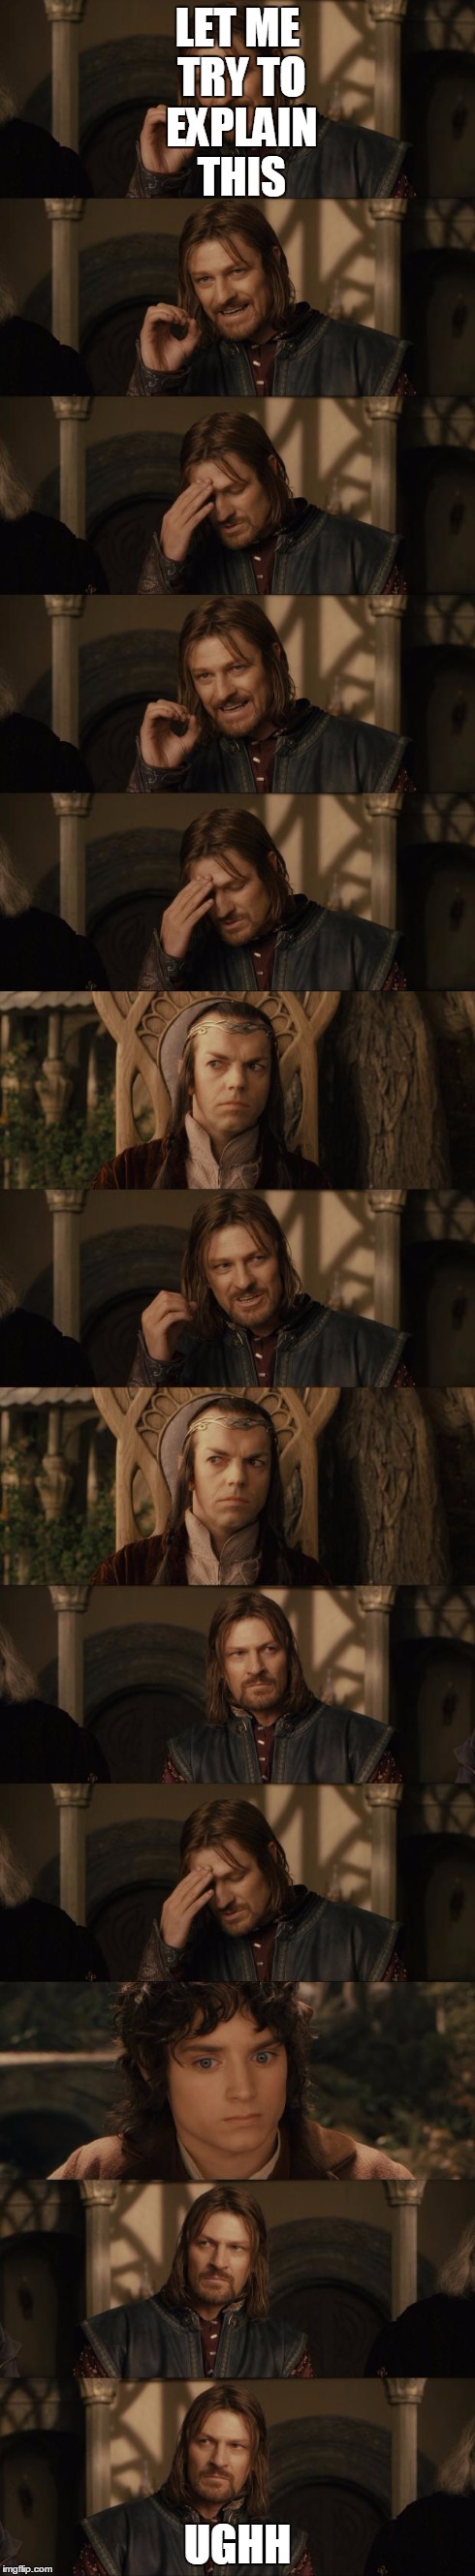 One Does Not Simply | LET ME TRY TO EXPLAIN THIS UGHH | image tagged in one does not simply | made w/ Imgflip meme maker